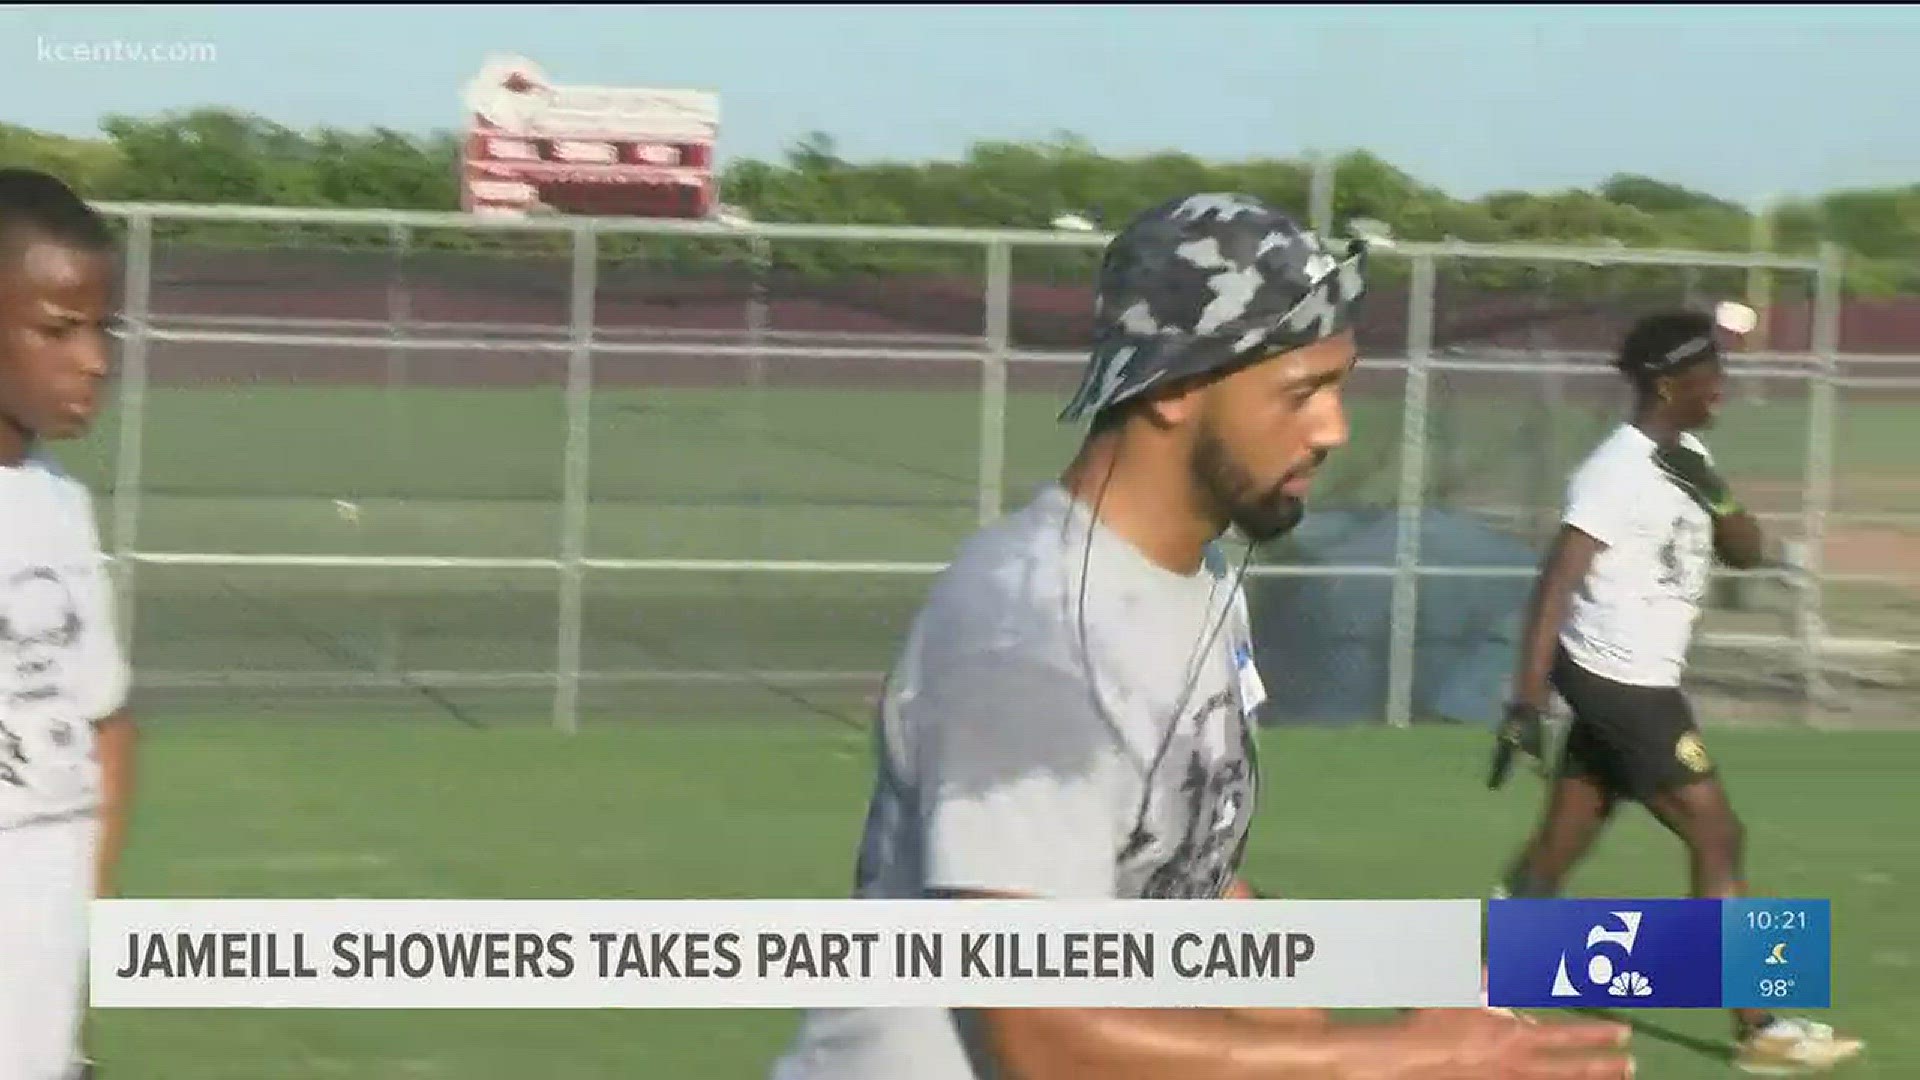 The Shoemaker grad is hoping to inspire fellow Killeen natives by helping at a free football camp.